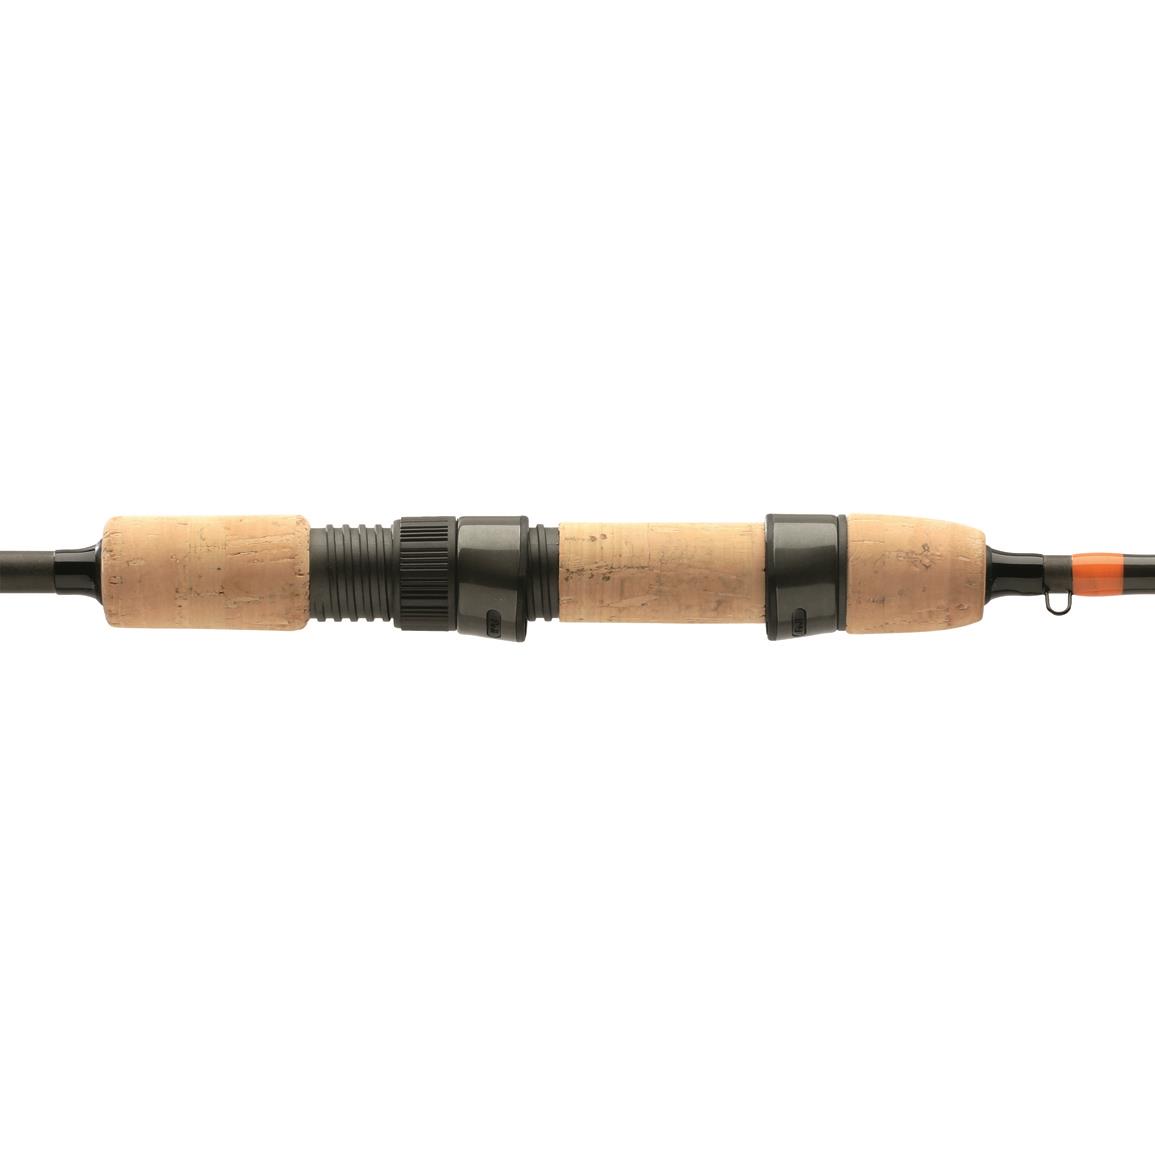 Carbon Crappie Spinning Rod